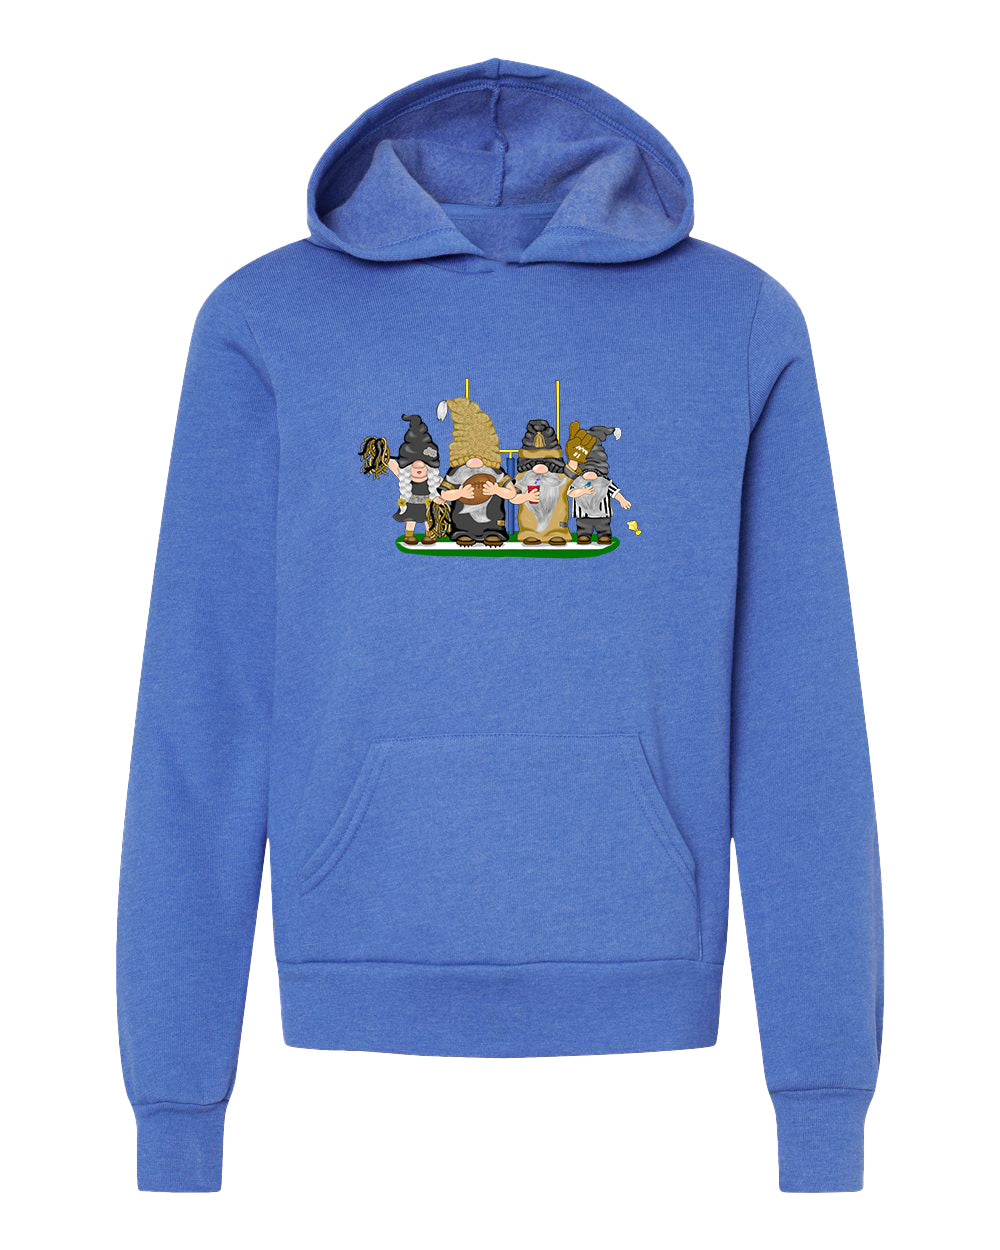 Gold & Black Football Gnomes  (similar to New Orleans) on Kids Hoodie